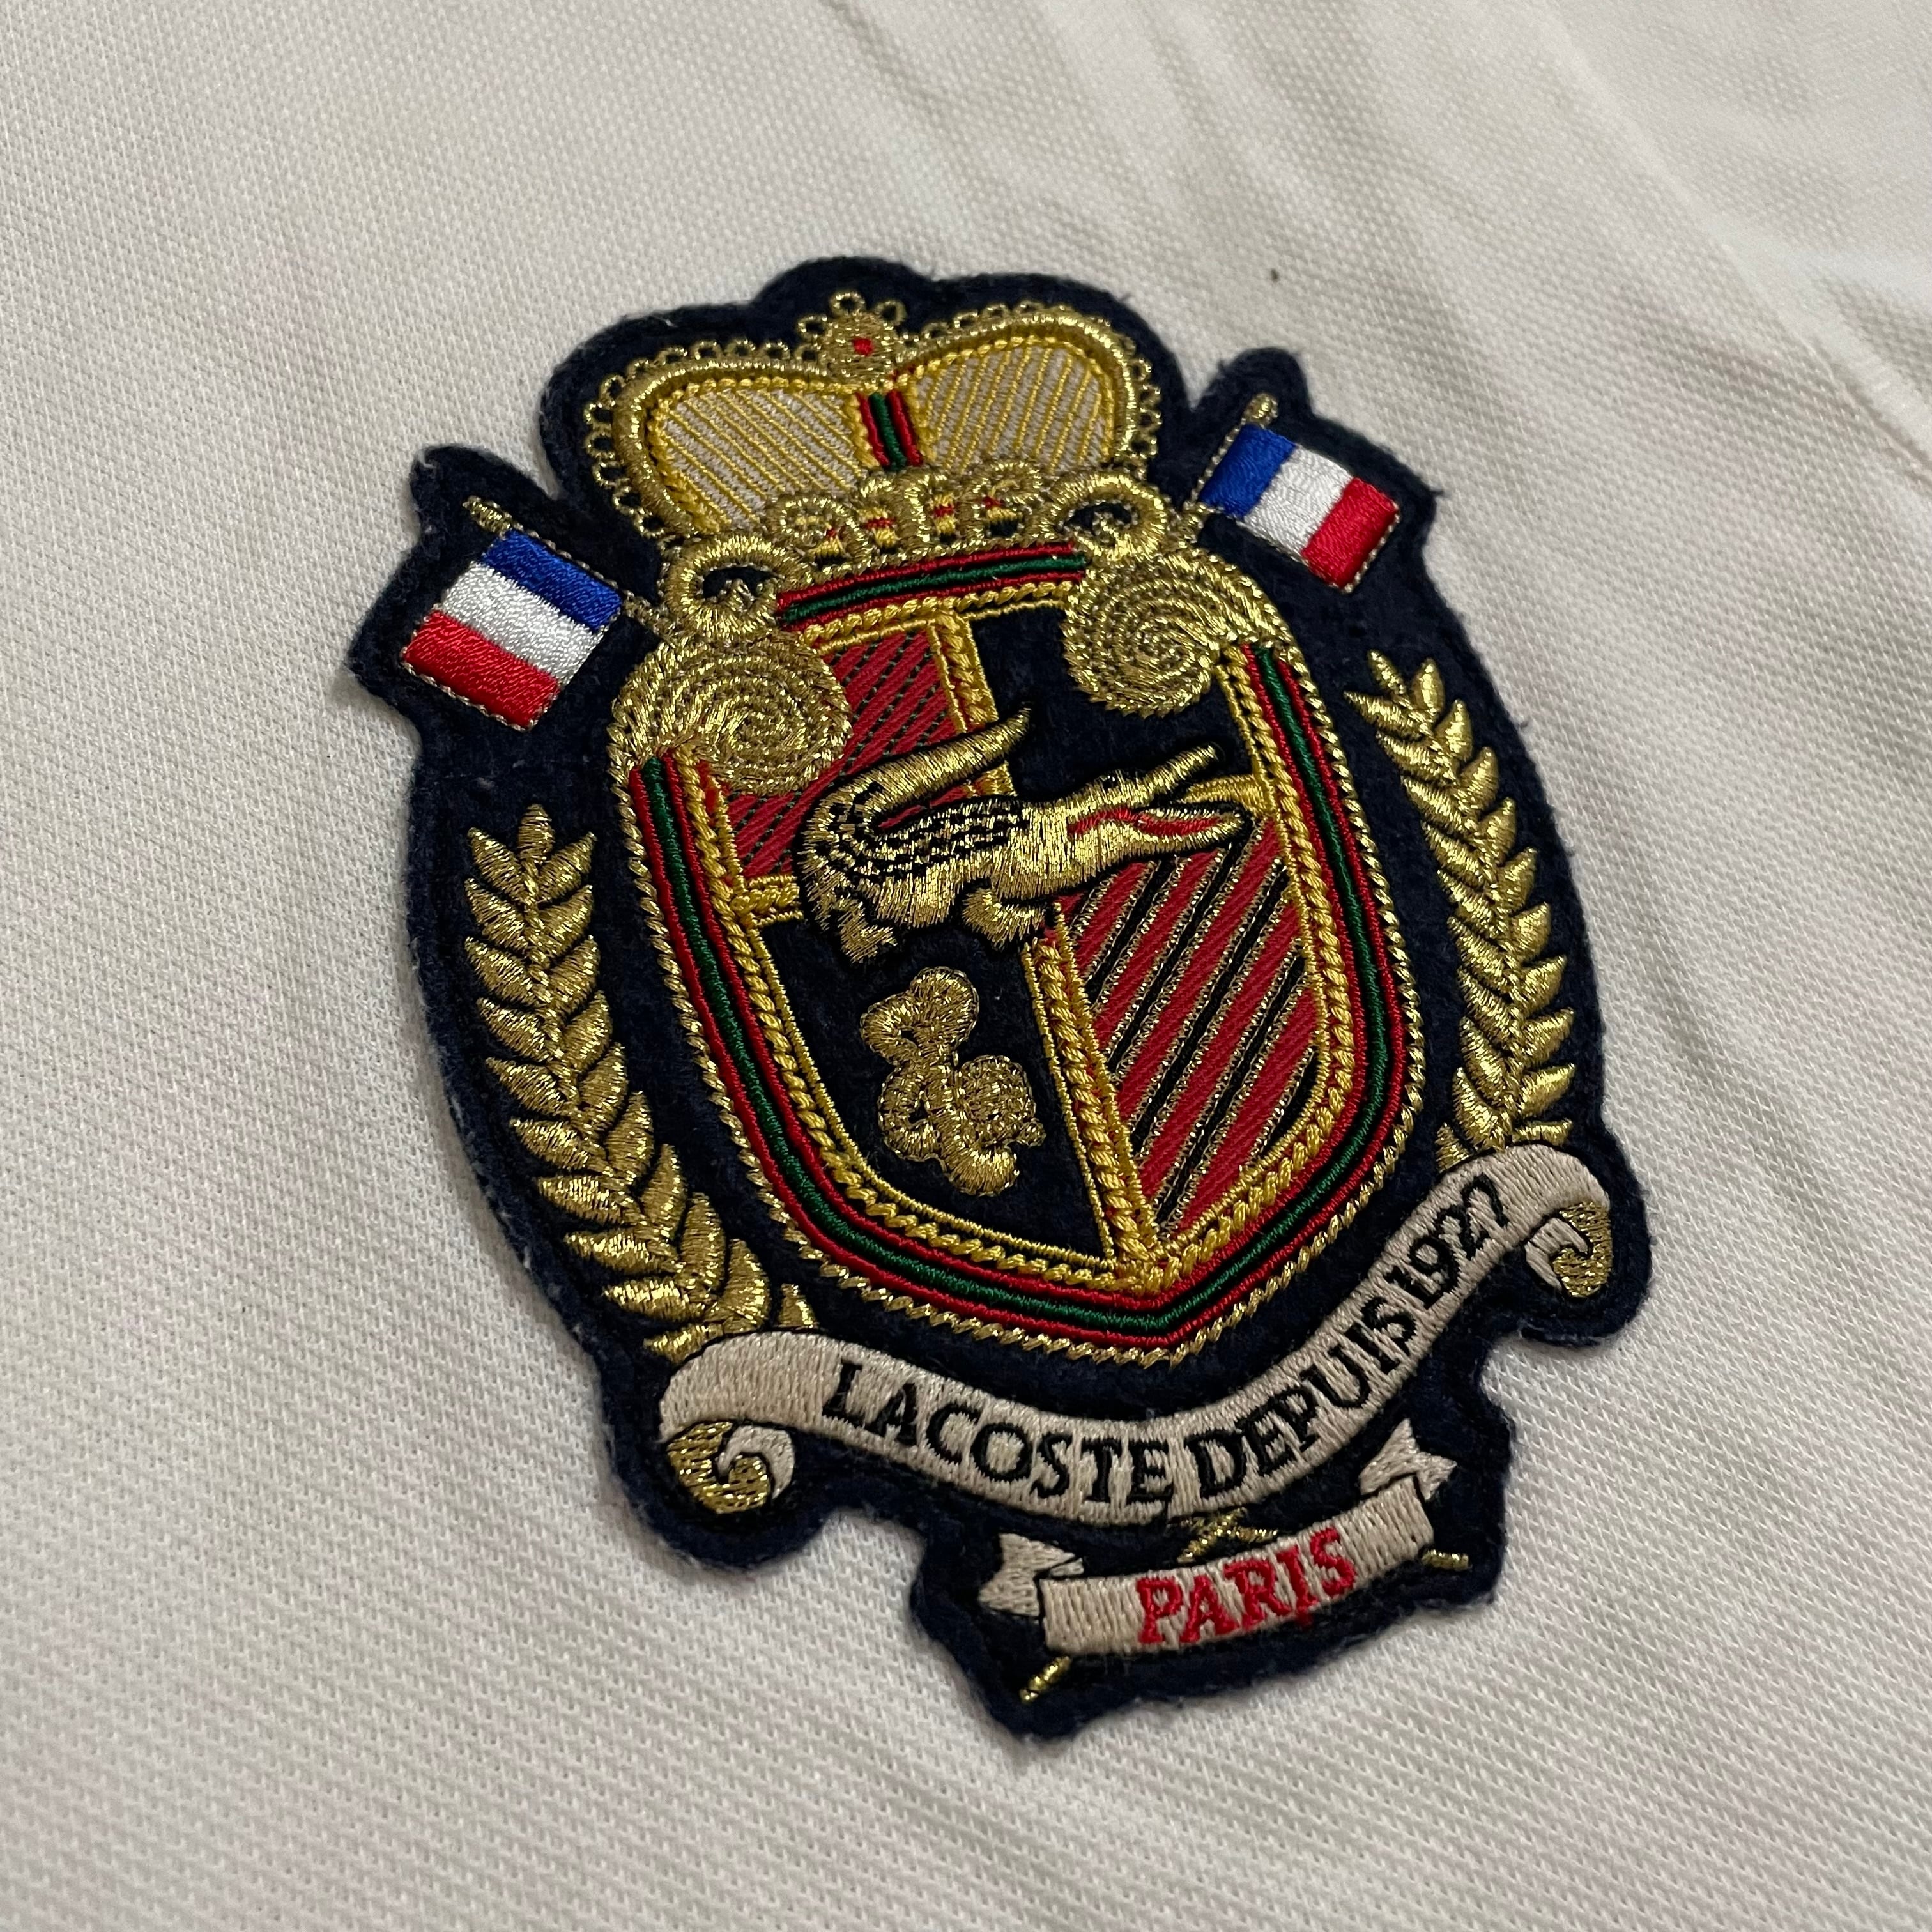 【LACOSTE】France embroidery design cotton polo shirt/ラコステ フランス国旗 刺繍 デザイン  コットン ポロシャツ/lsize/#0723/osaka | 〚EINS_archive〛 powered by BASE